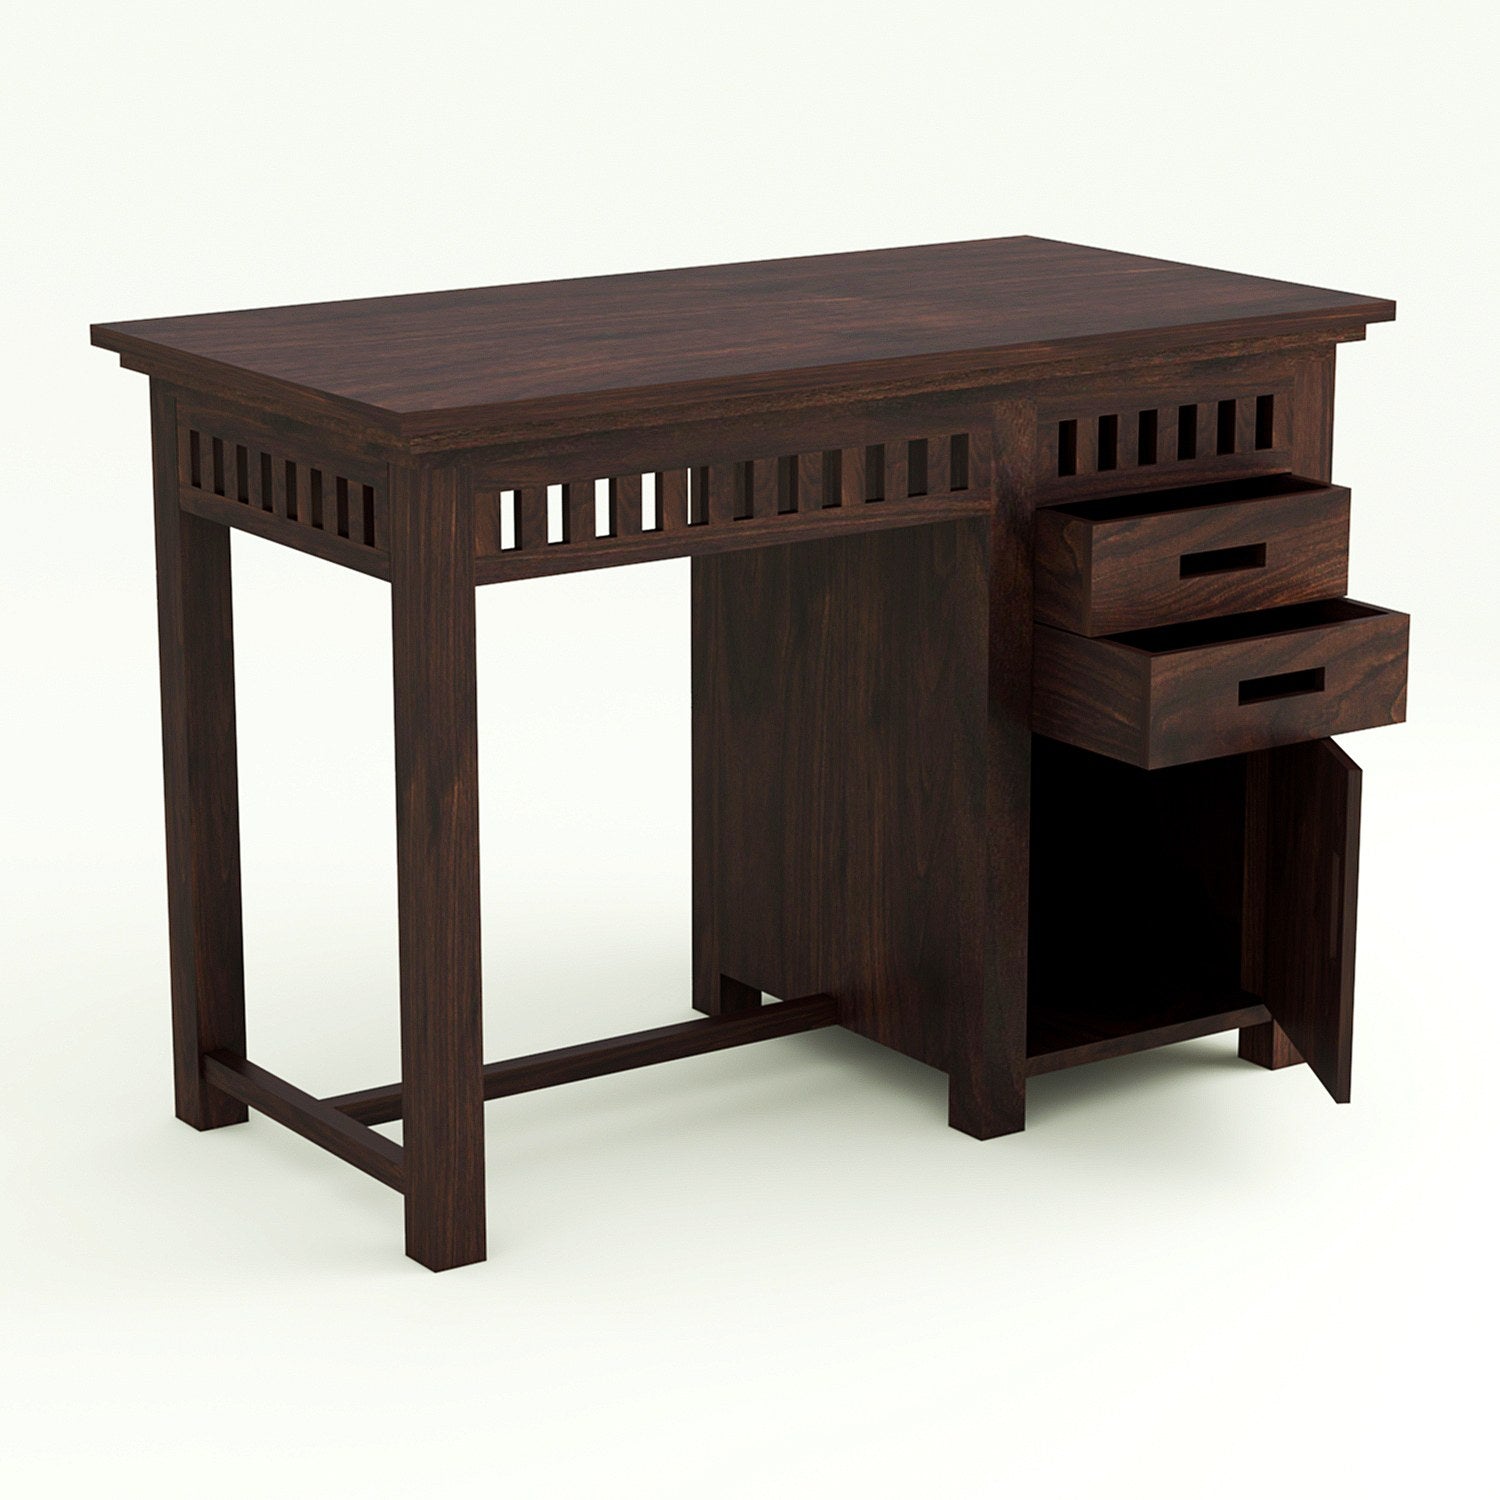 Amer Solid Wood Study Table With Chair For Home (Walnut Finish)